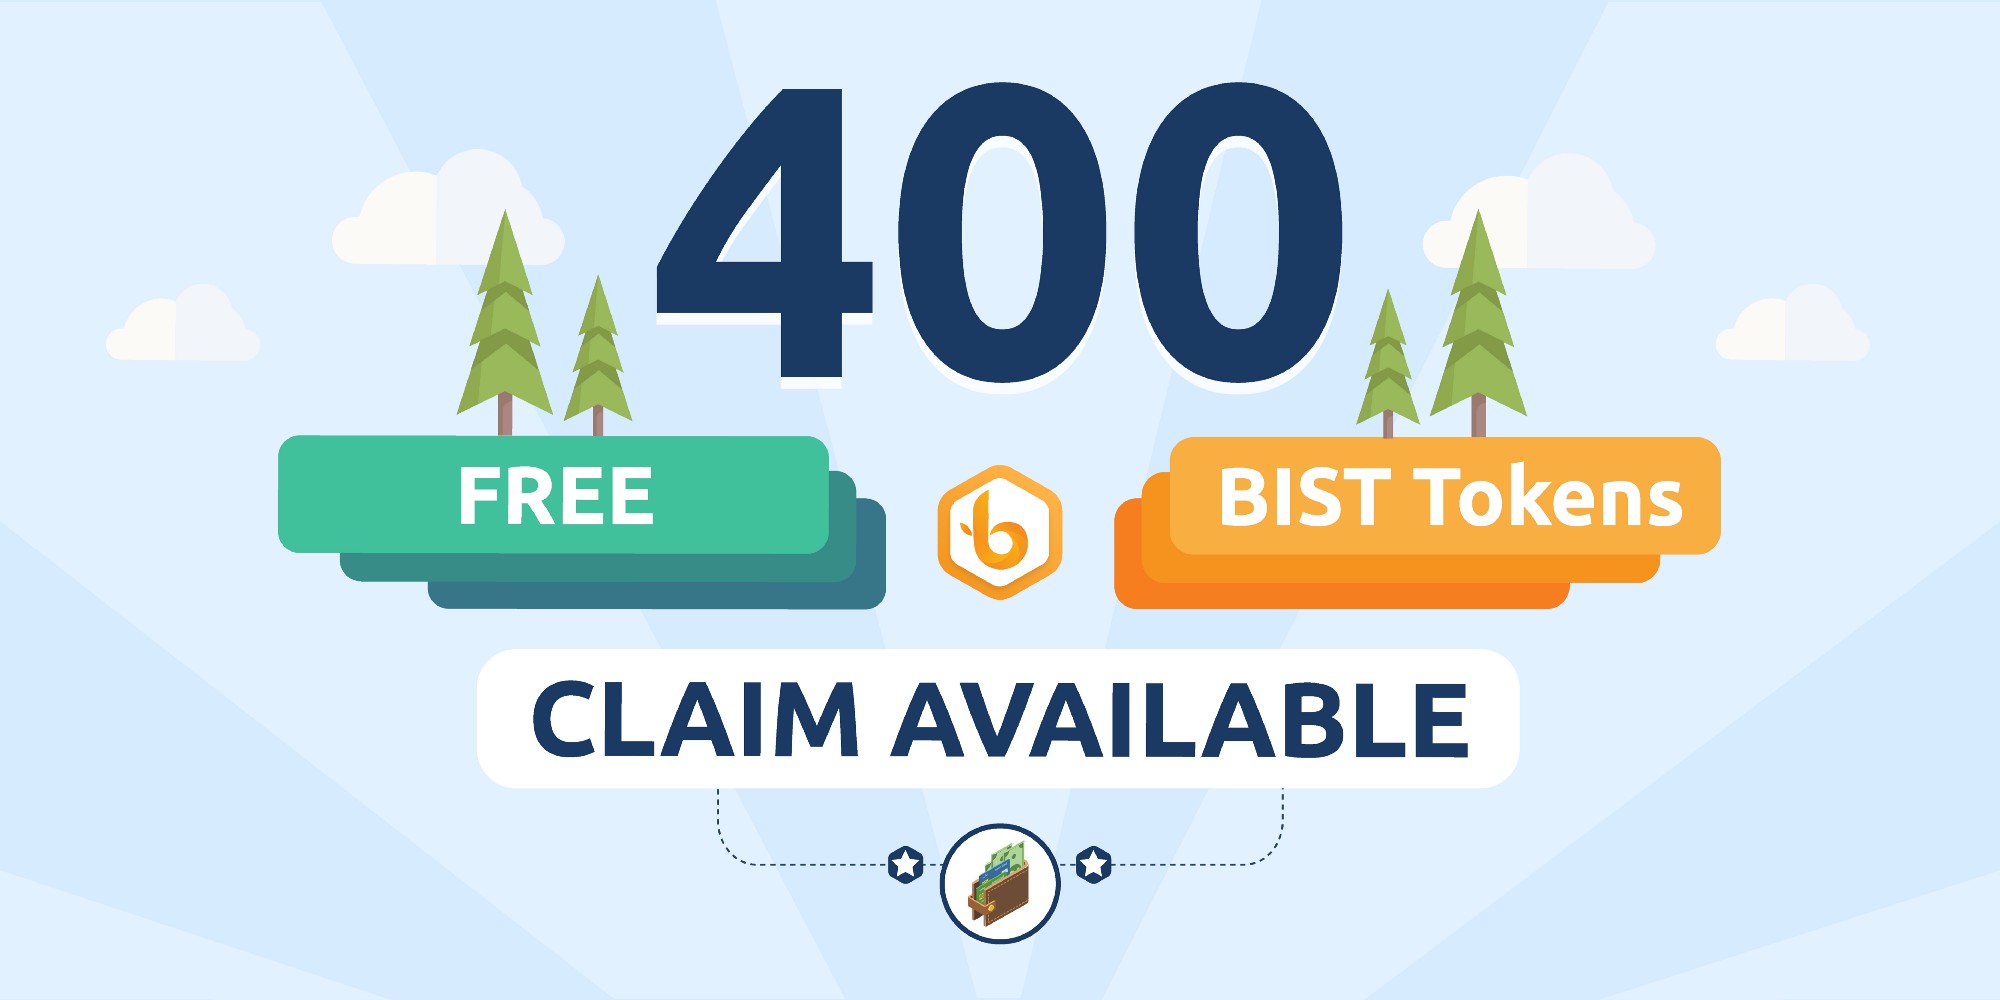 Surprise! Your 400 Free BIST Tokens are now Claimable!